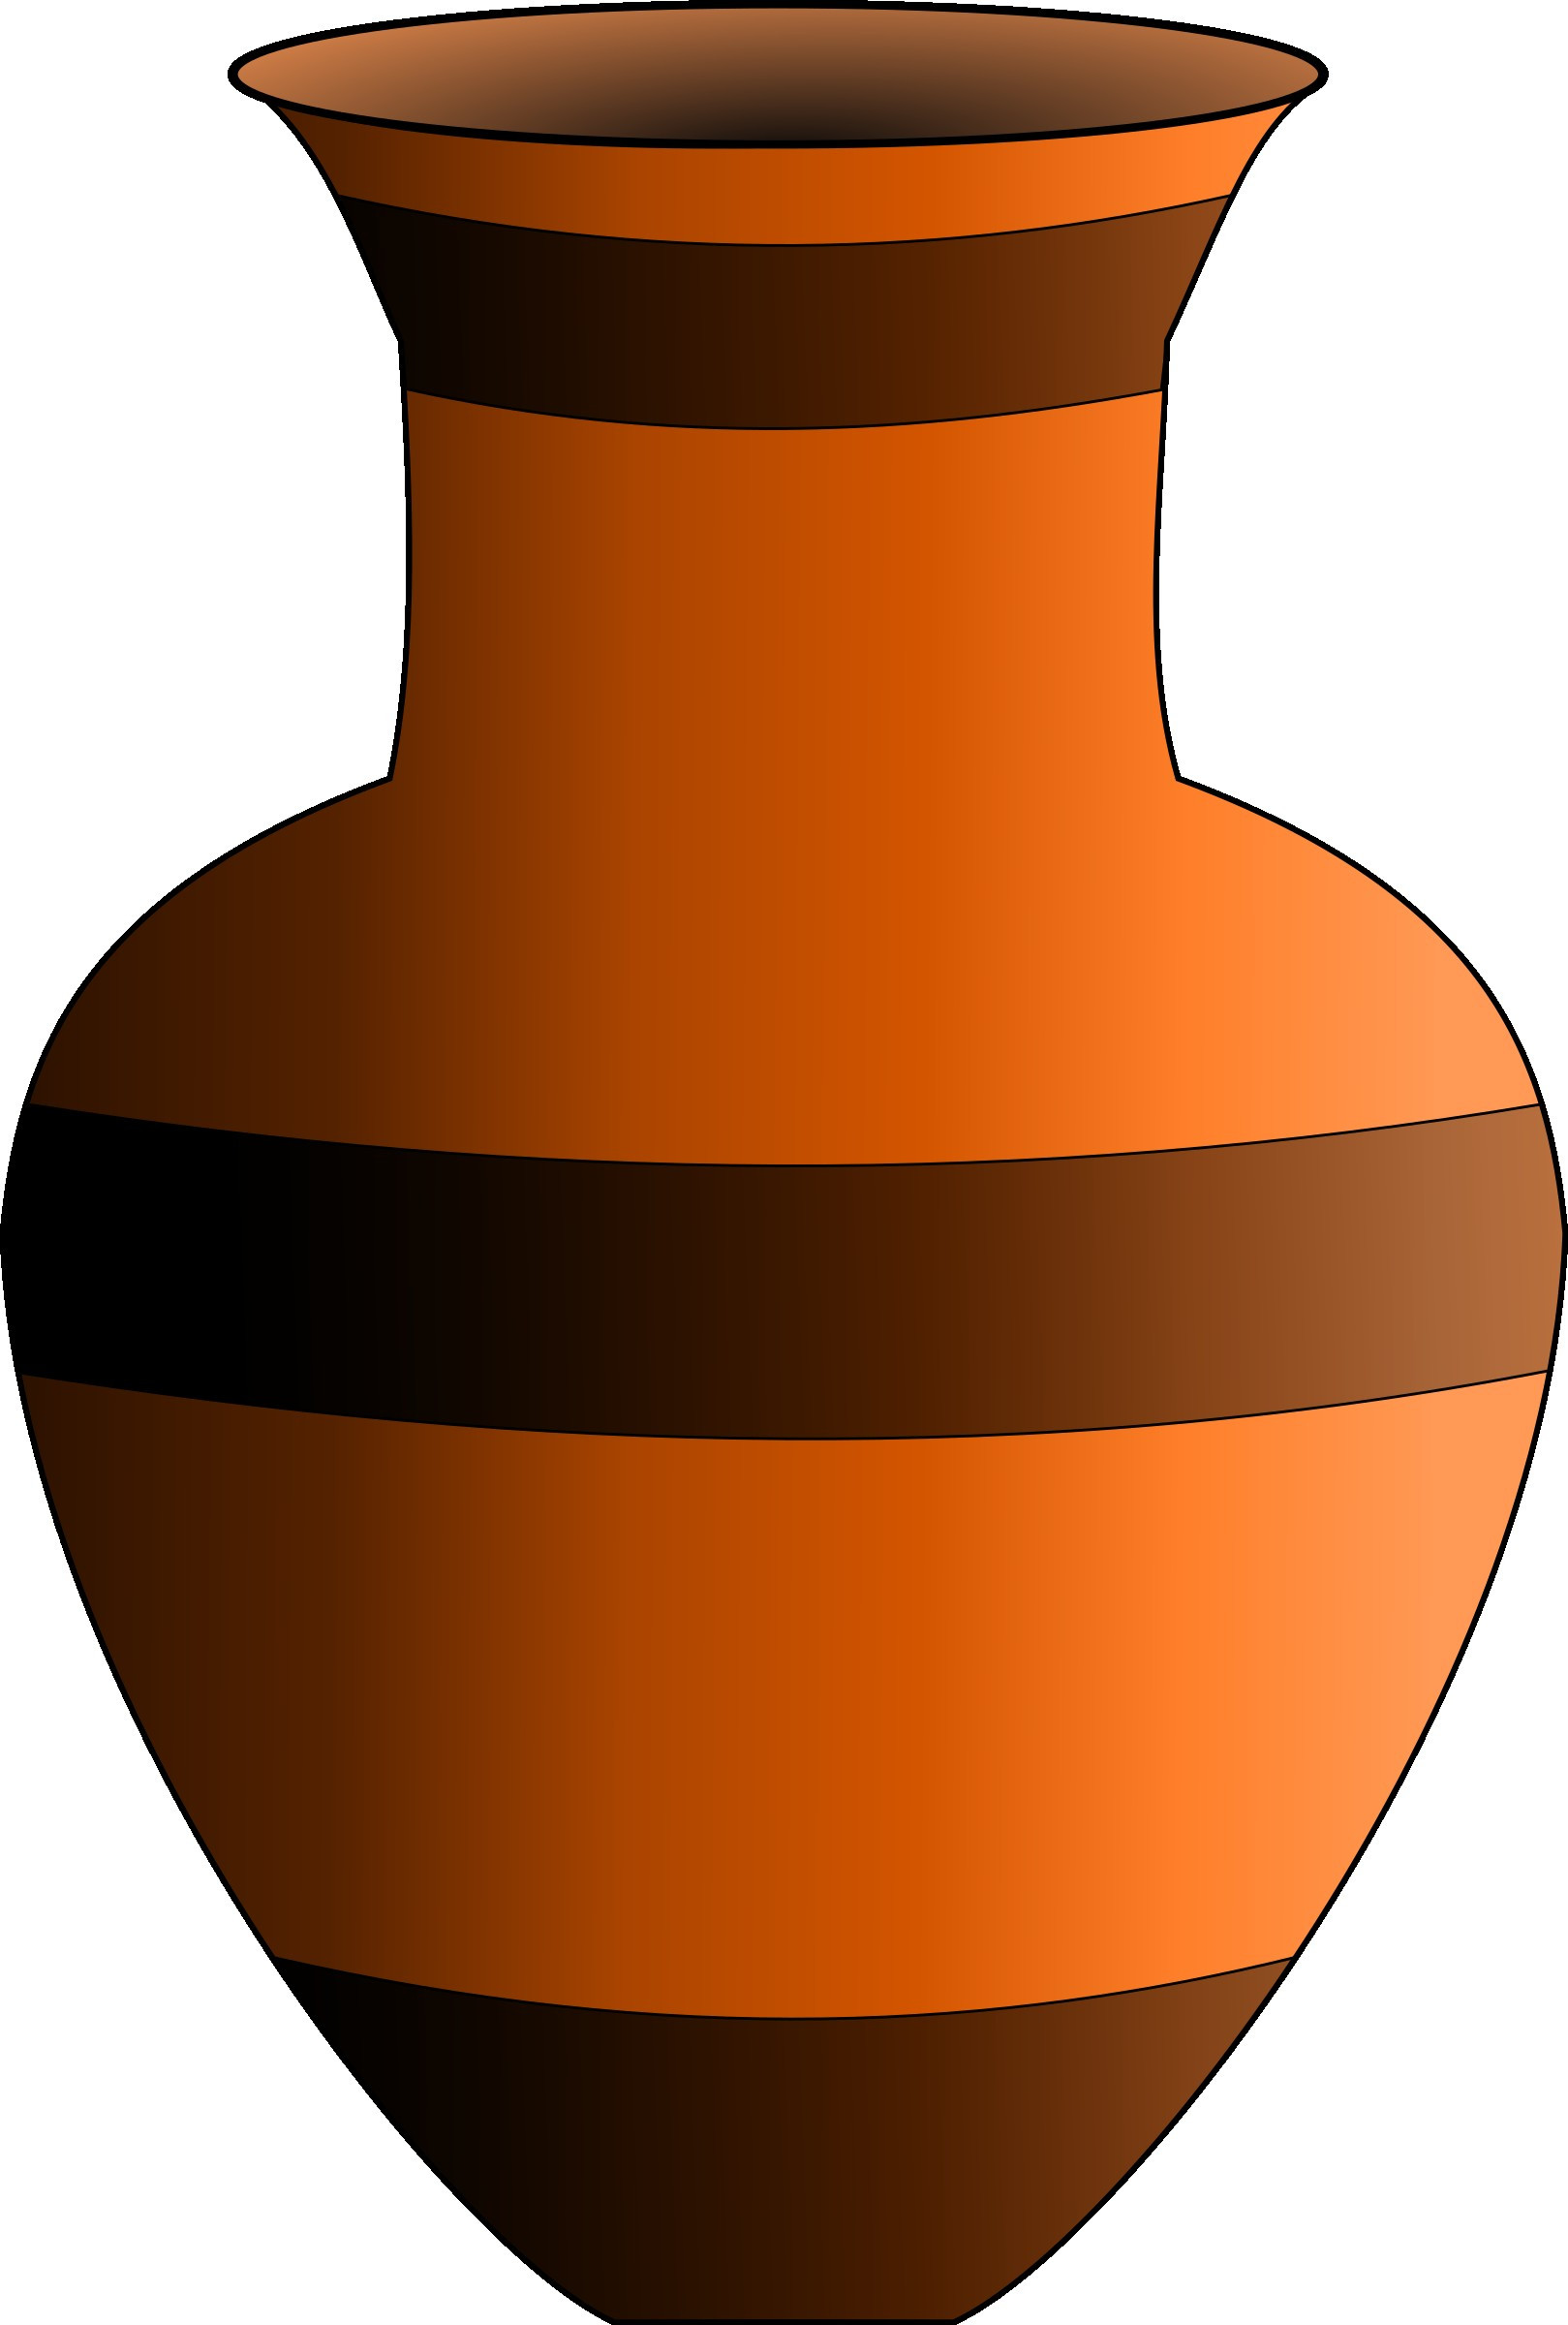 21 Fabulous Yellow Pottery Vase 2024 free download yellow pottery vase of will clipart colored flower vase clip arth vases art infoi 0d of for within clipart vase vase clipart png 1619 2400 for clipart of vase